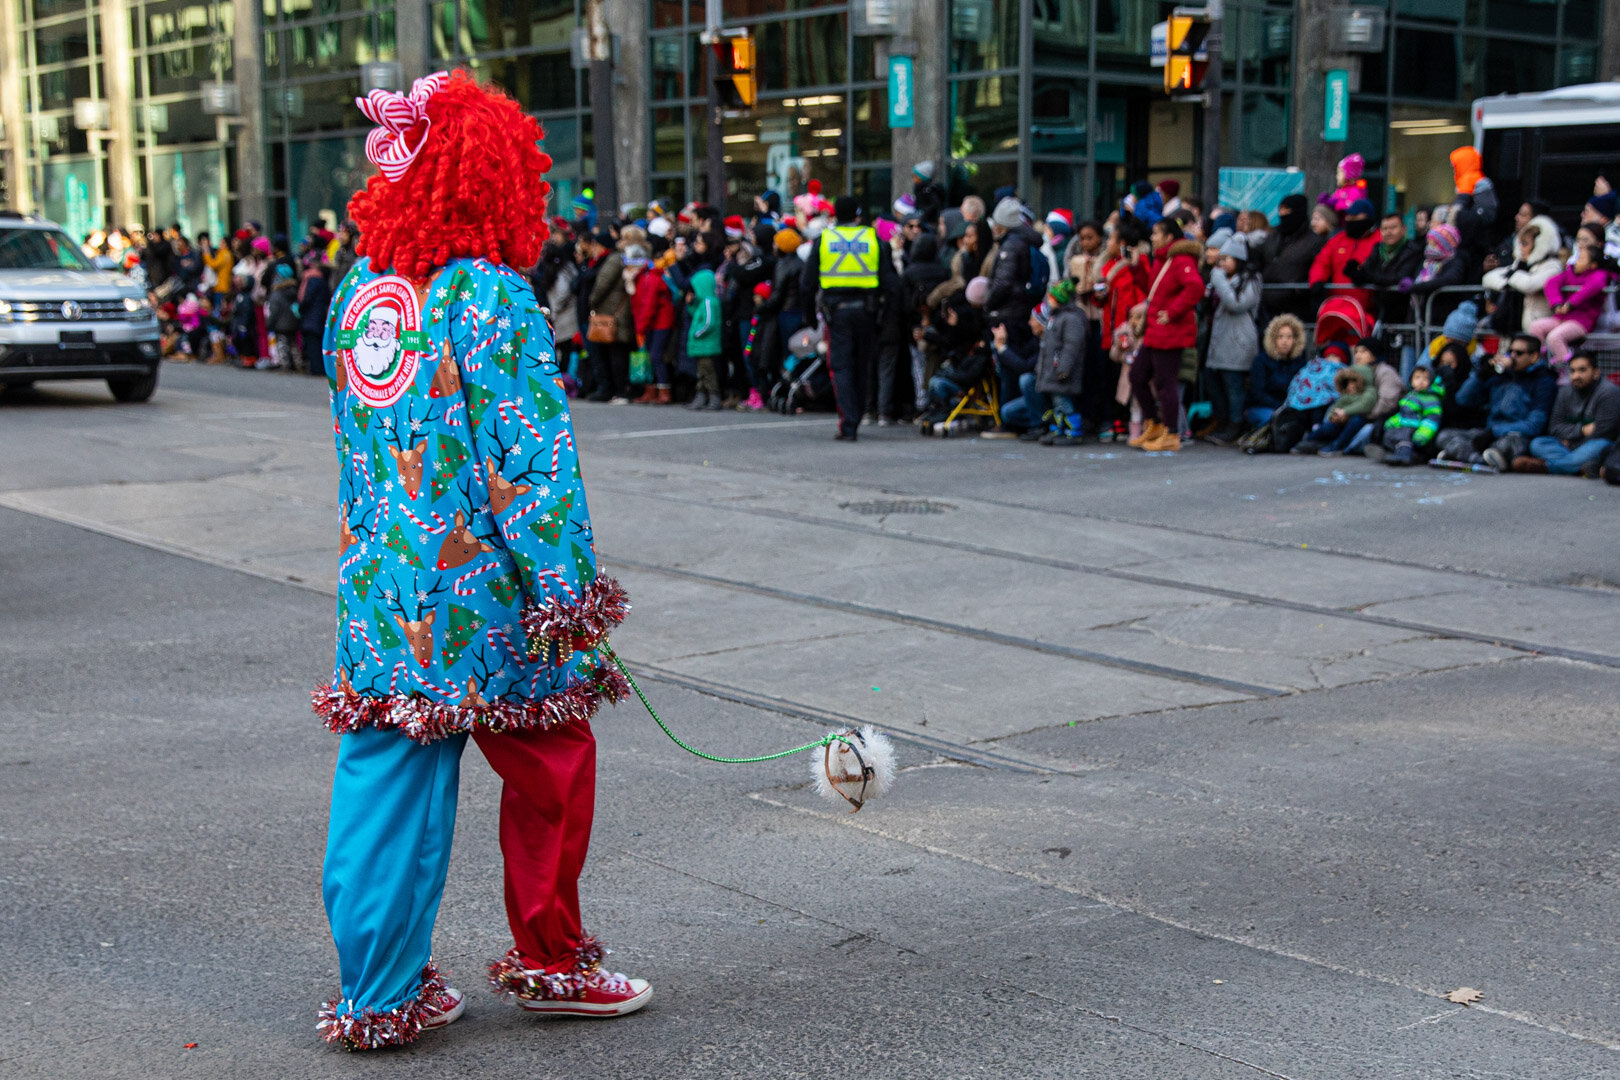 Celebrity Clown walking her invisible dog